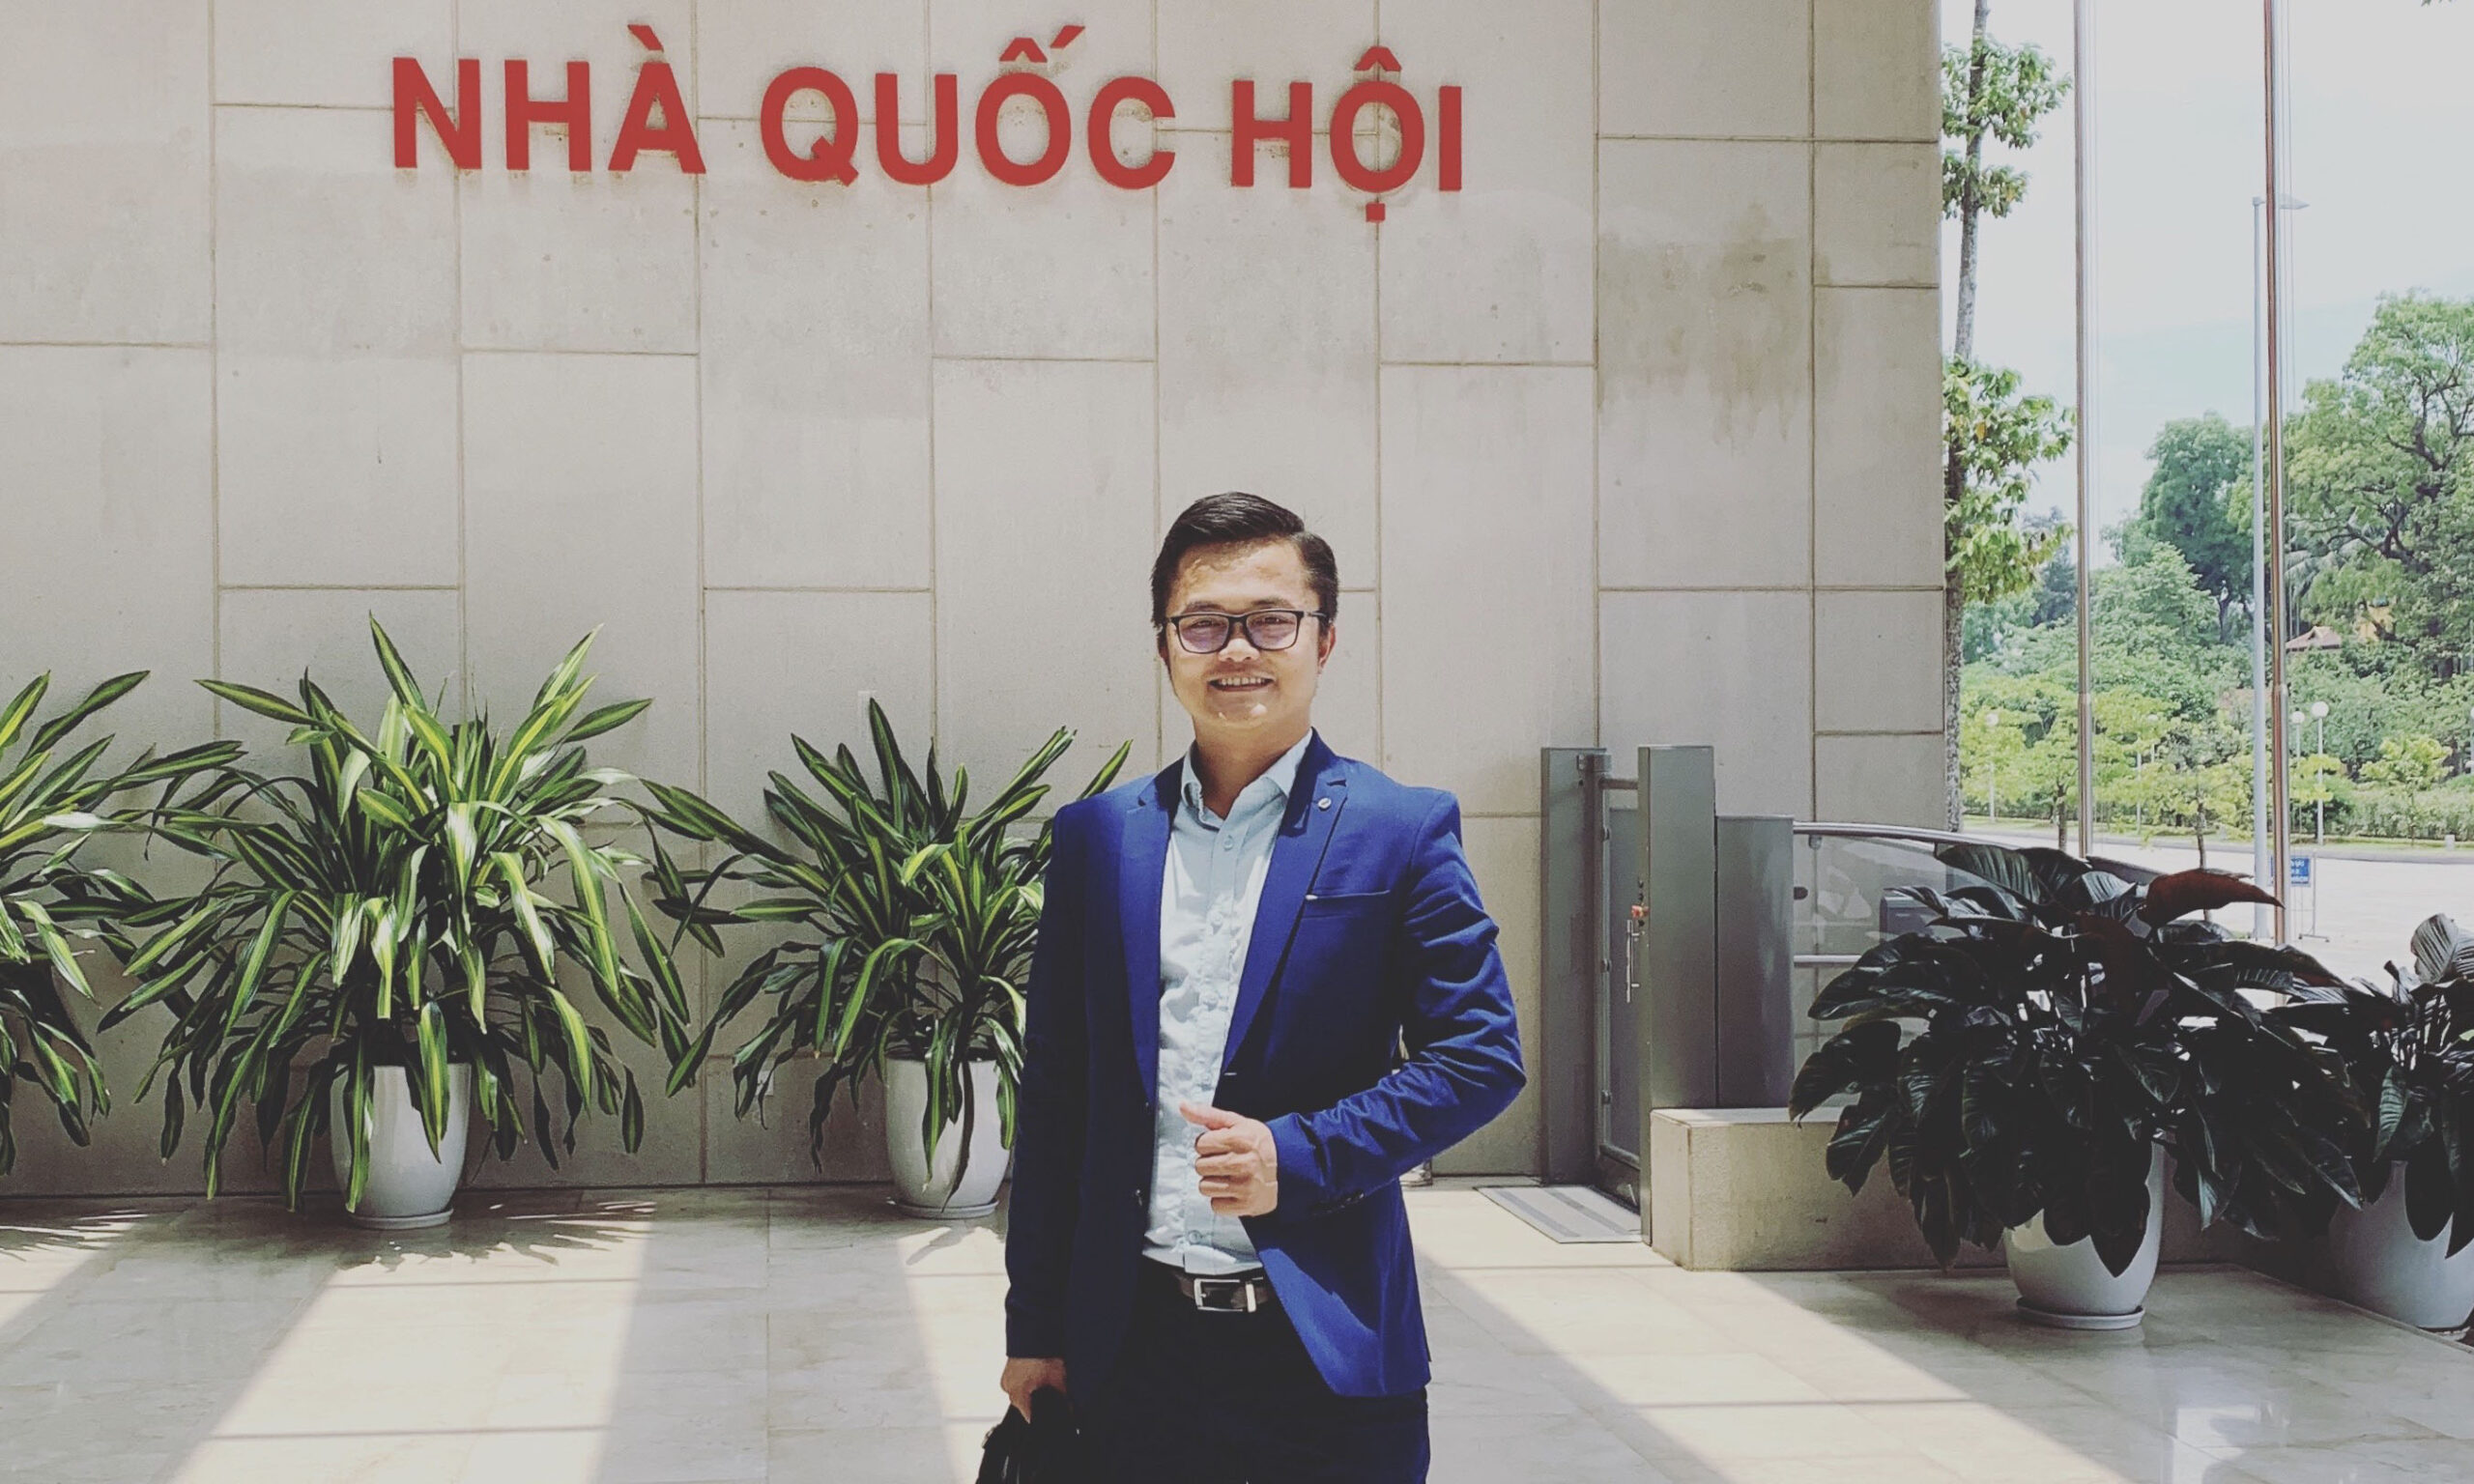 Expert Le Ngoc Son at the National Assembly